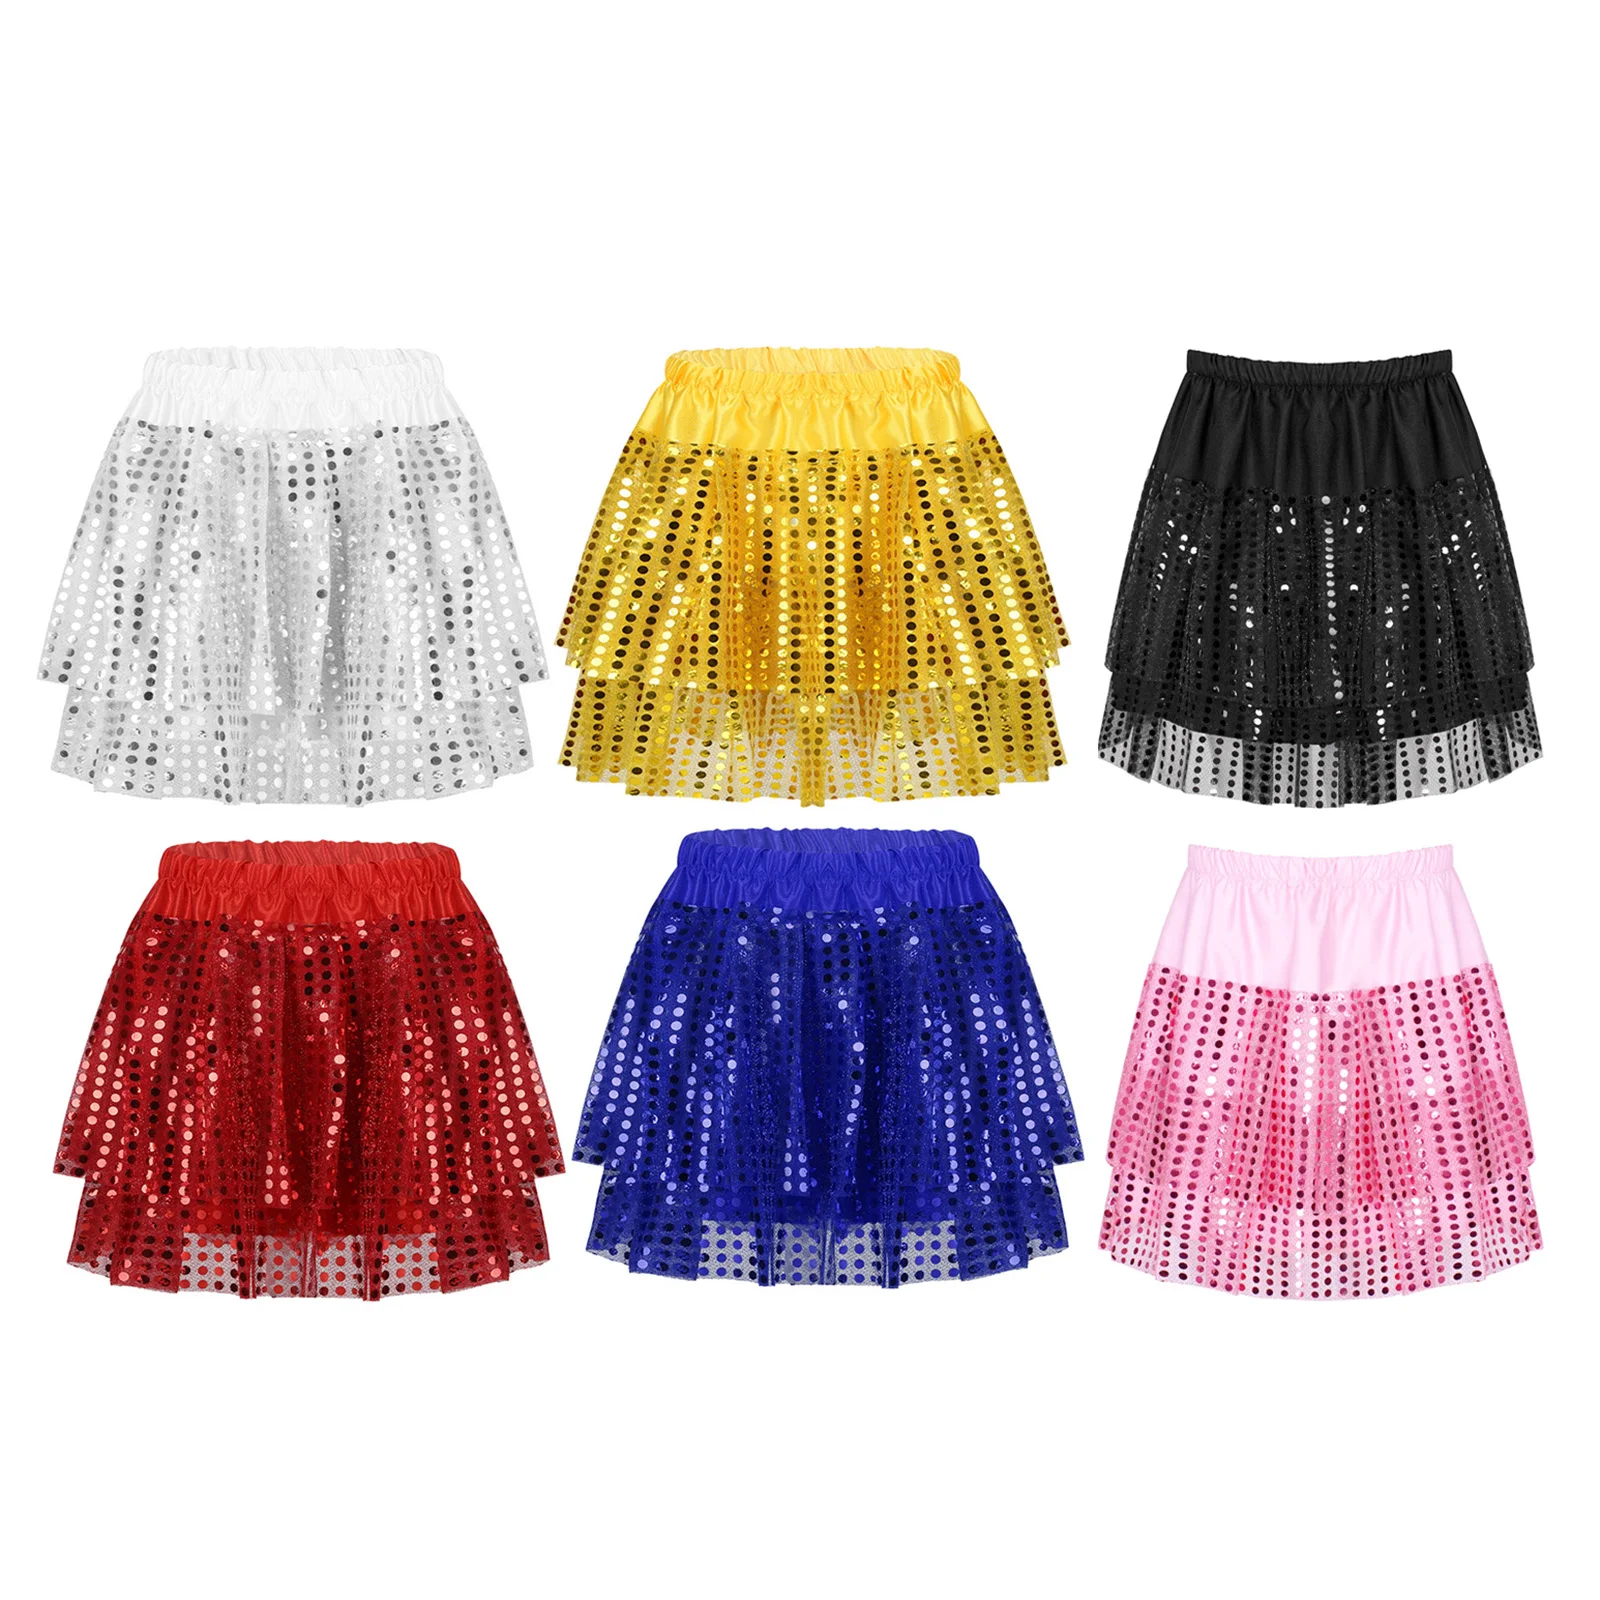 Hip Hop Dance Clothing Girls Kids Shiny Sequins Elastic Waistband Tiered Tutu Skirt For Latin Jazz Dancing Stage Performance